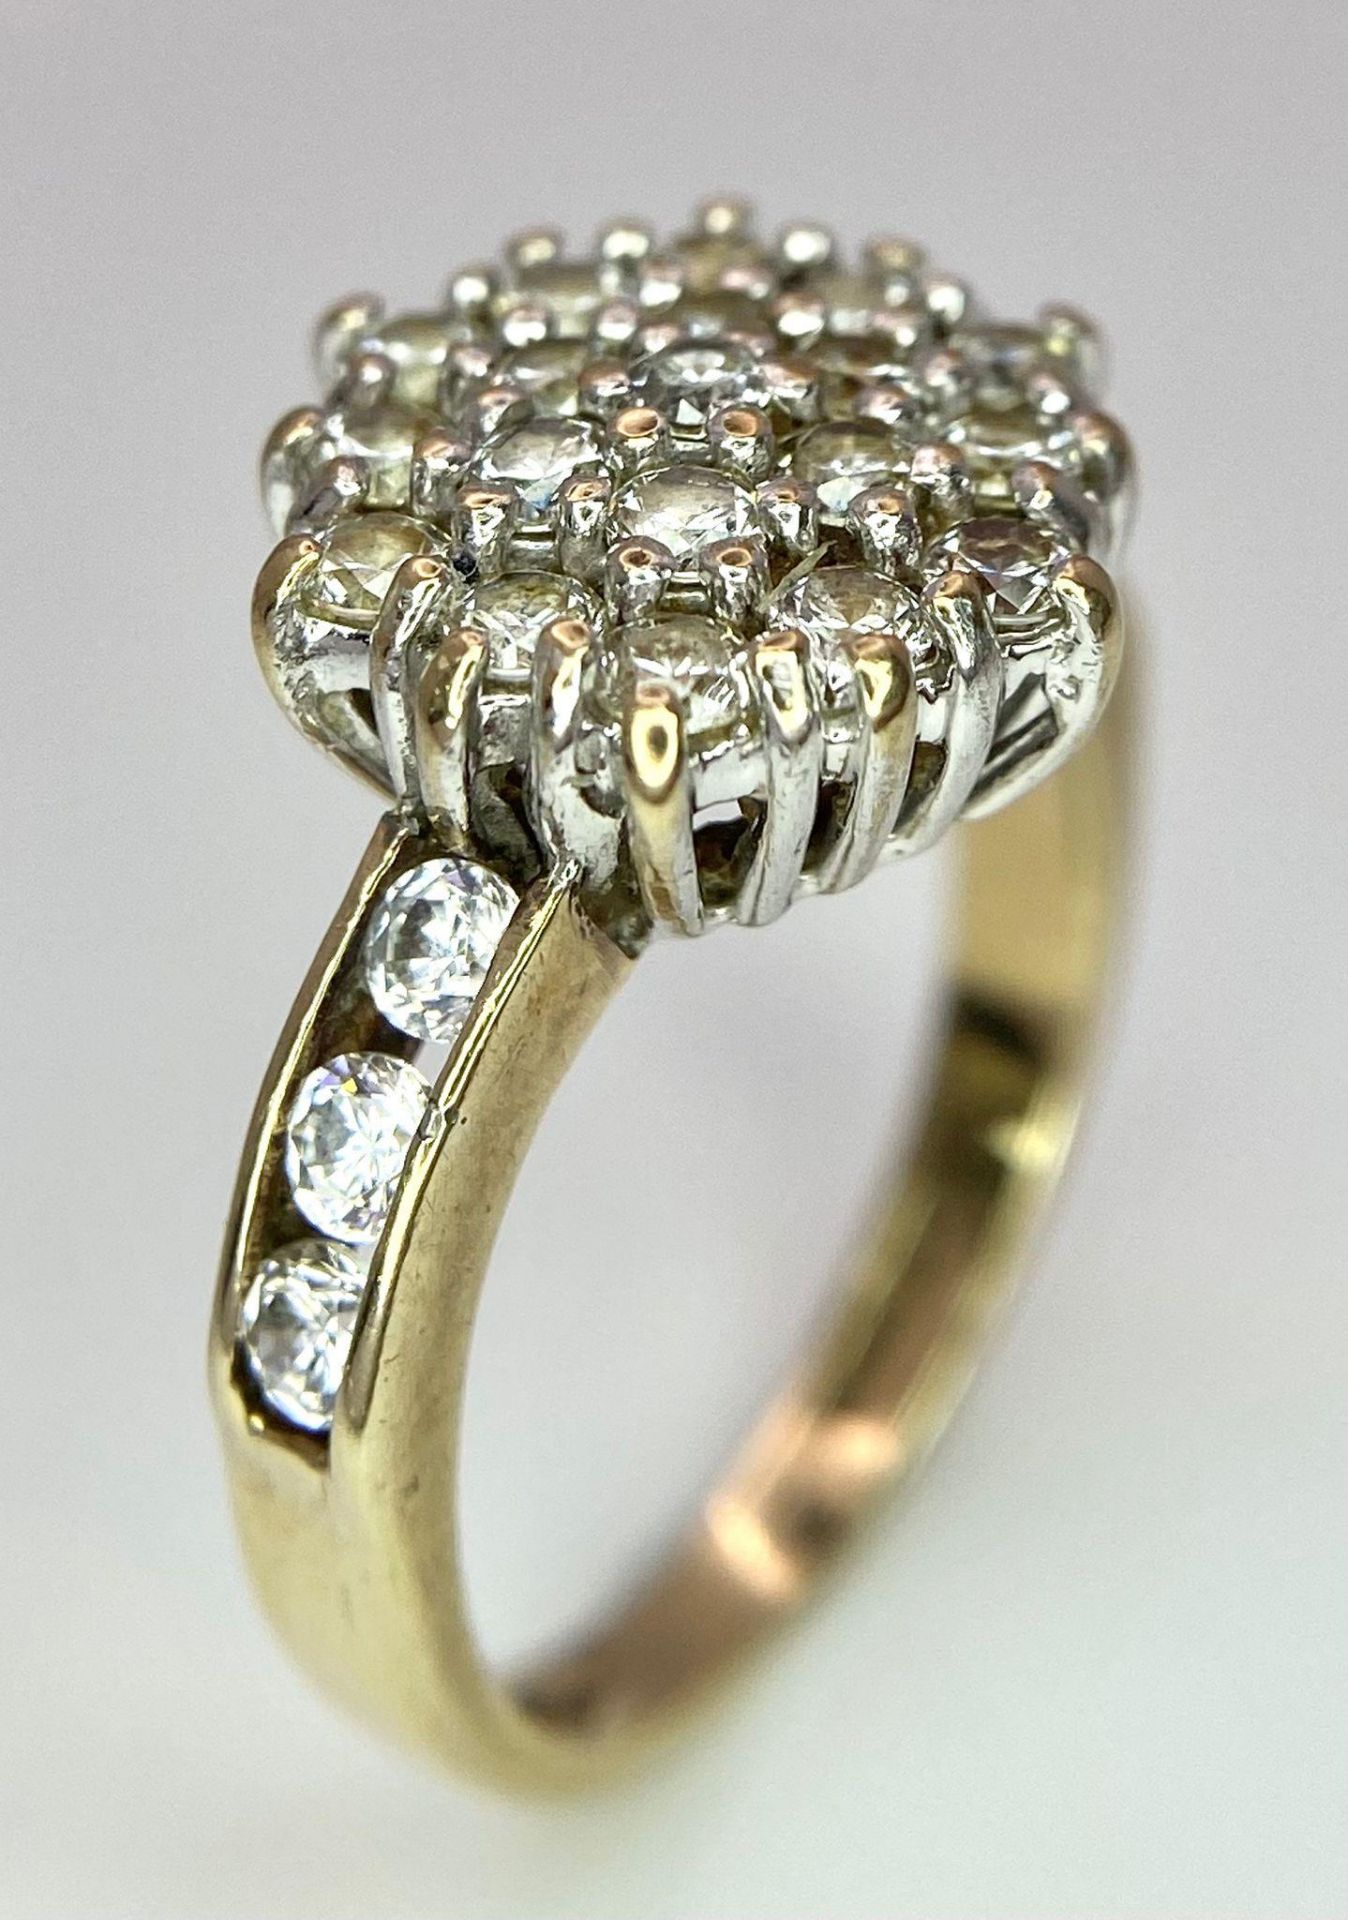 A 9K Yellow Gold CZ Flower Cluster Ring. Size I. 3.1g total weight. - Image 5 of 8